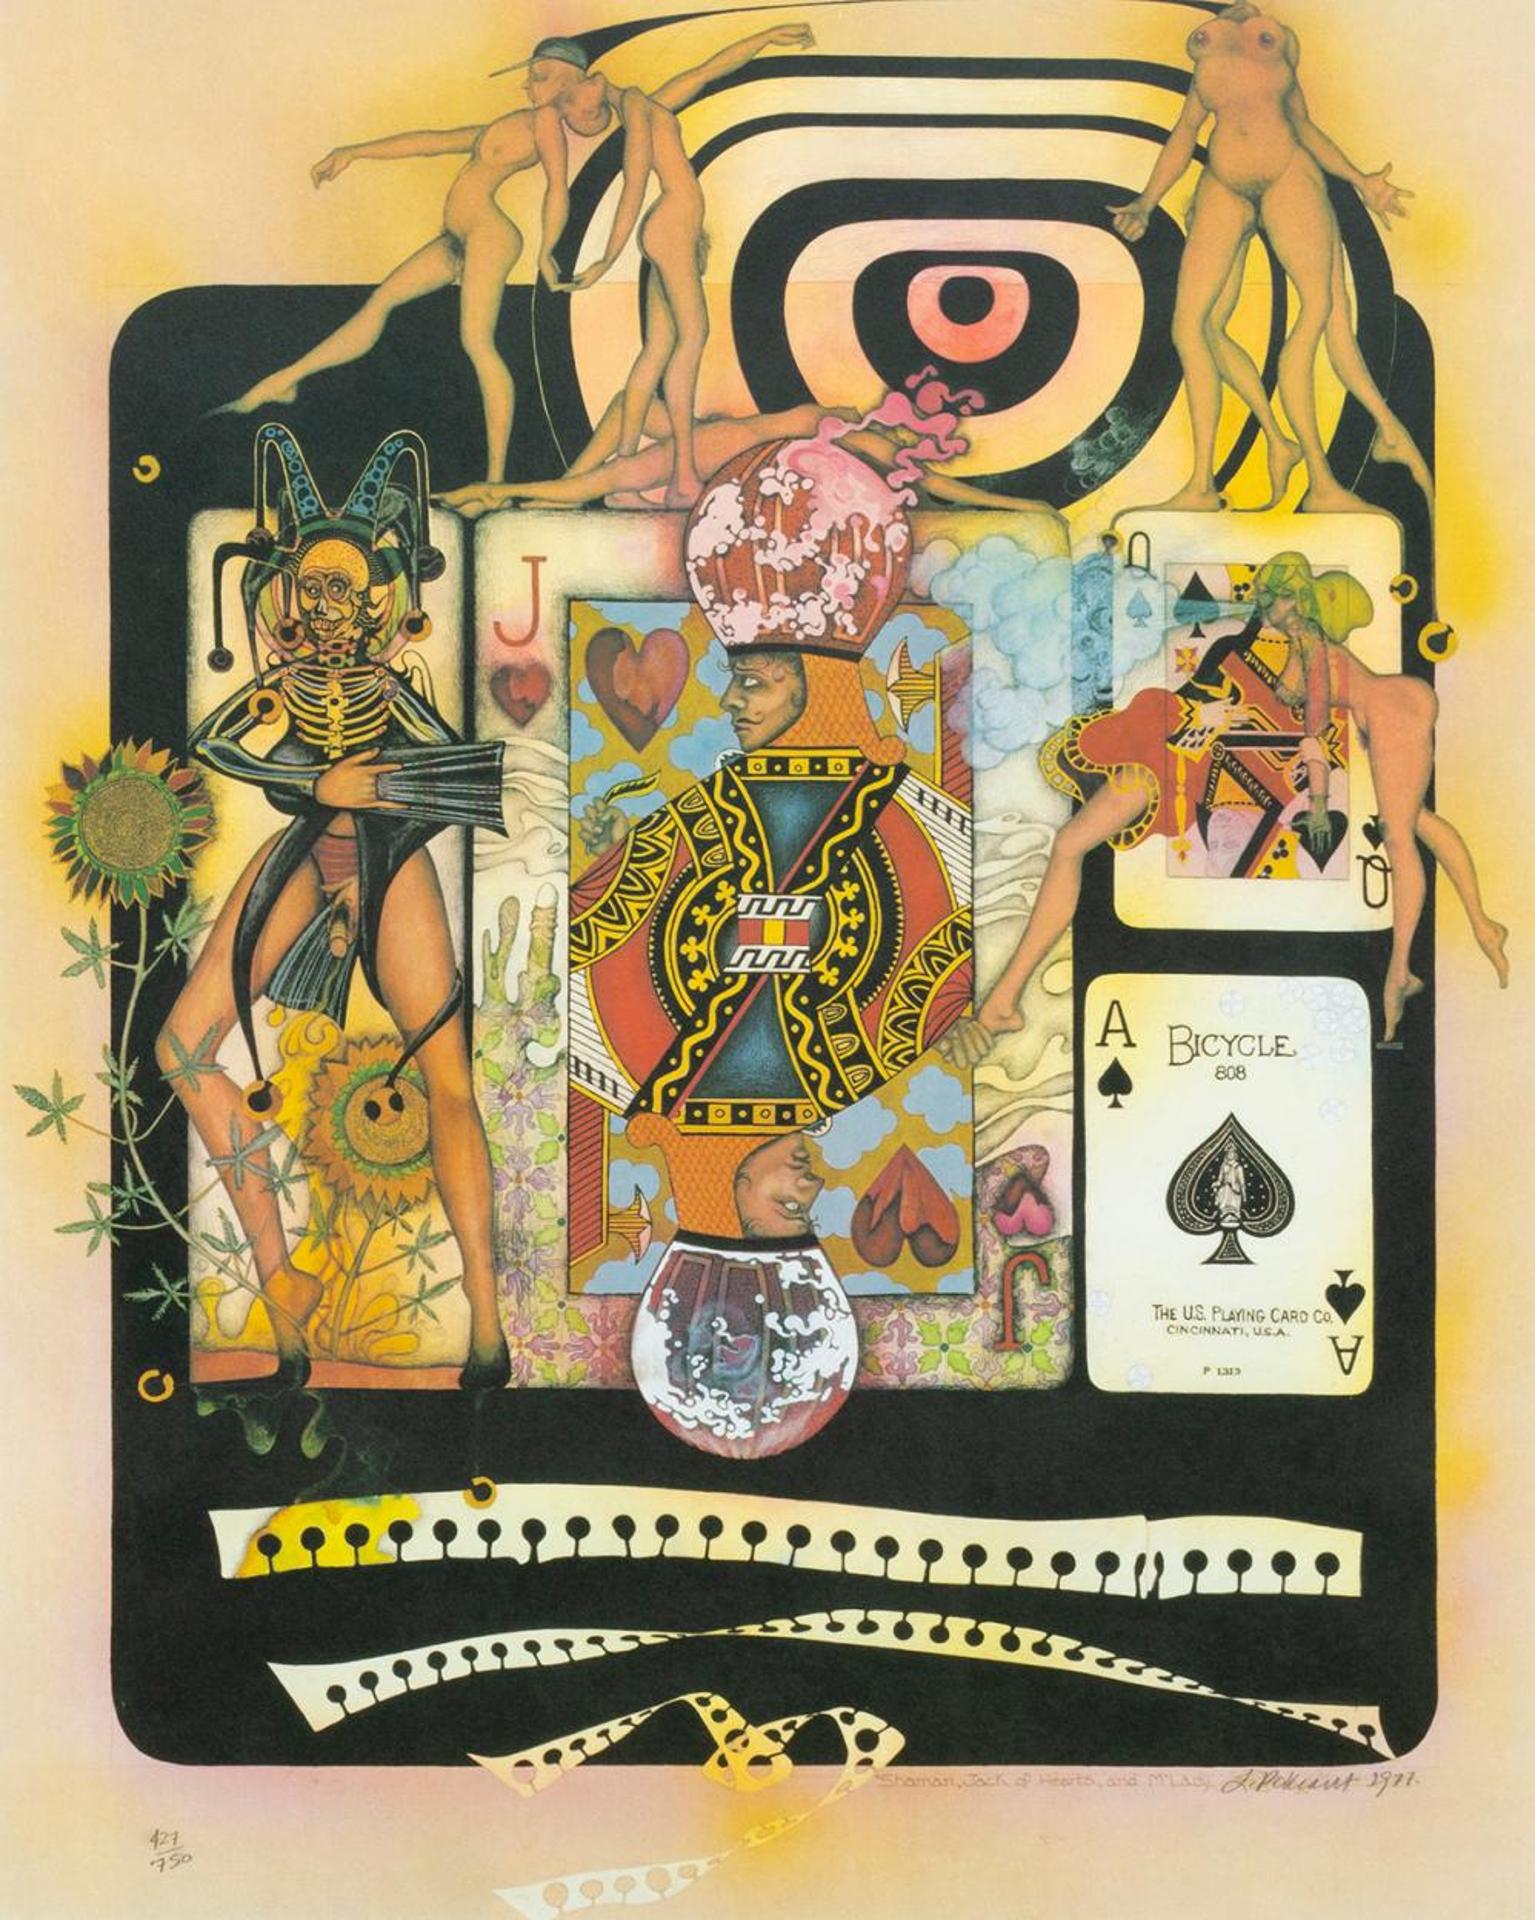 Luther Pokrant (1947) - Shaman, Jack of Hearts and M'Lady